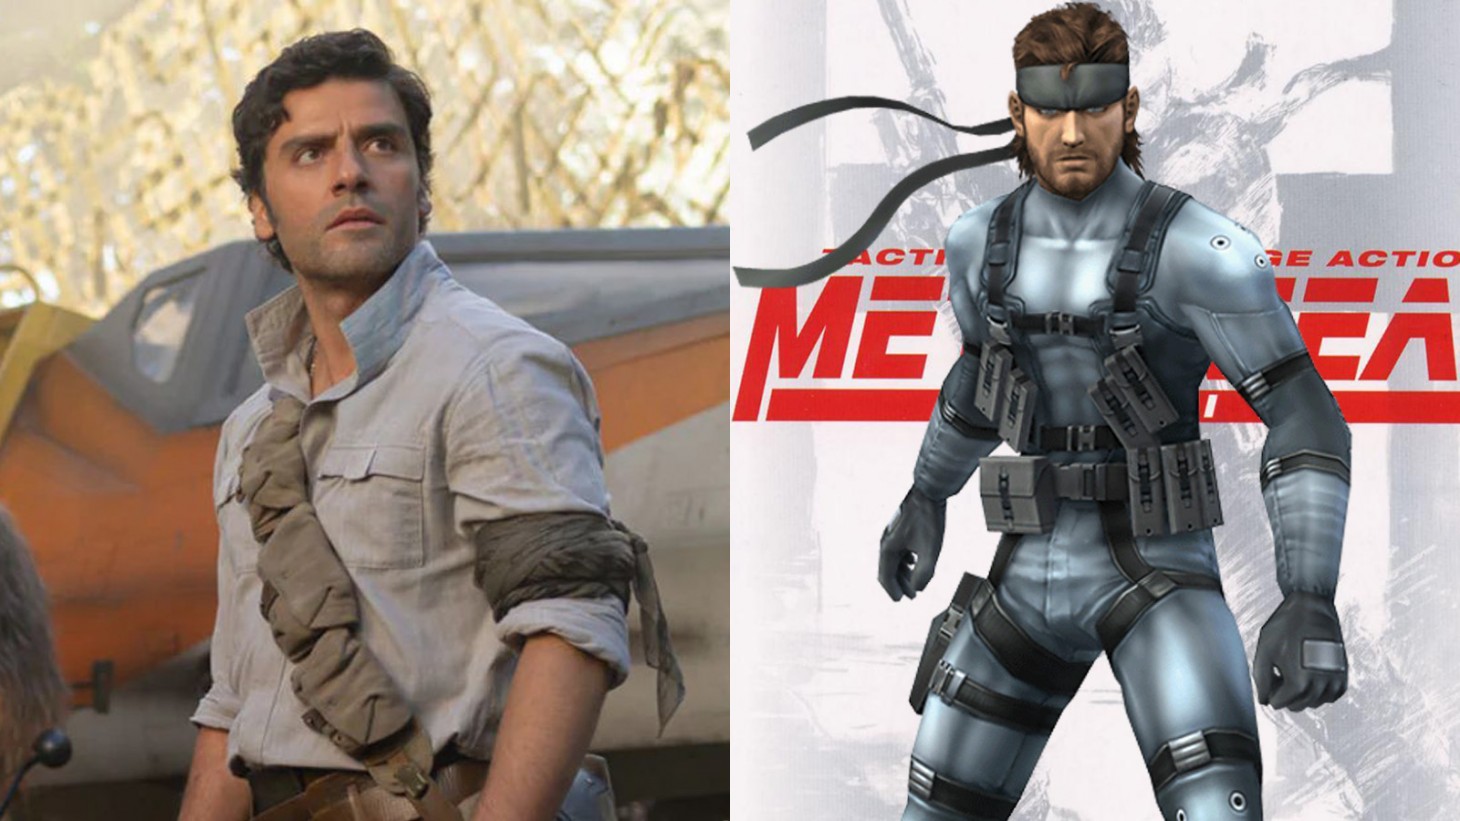 What a Thrill: Oscar Isaac Cast as Metal Gear Solid's Solid Snake